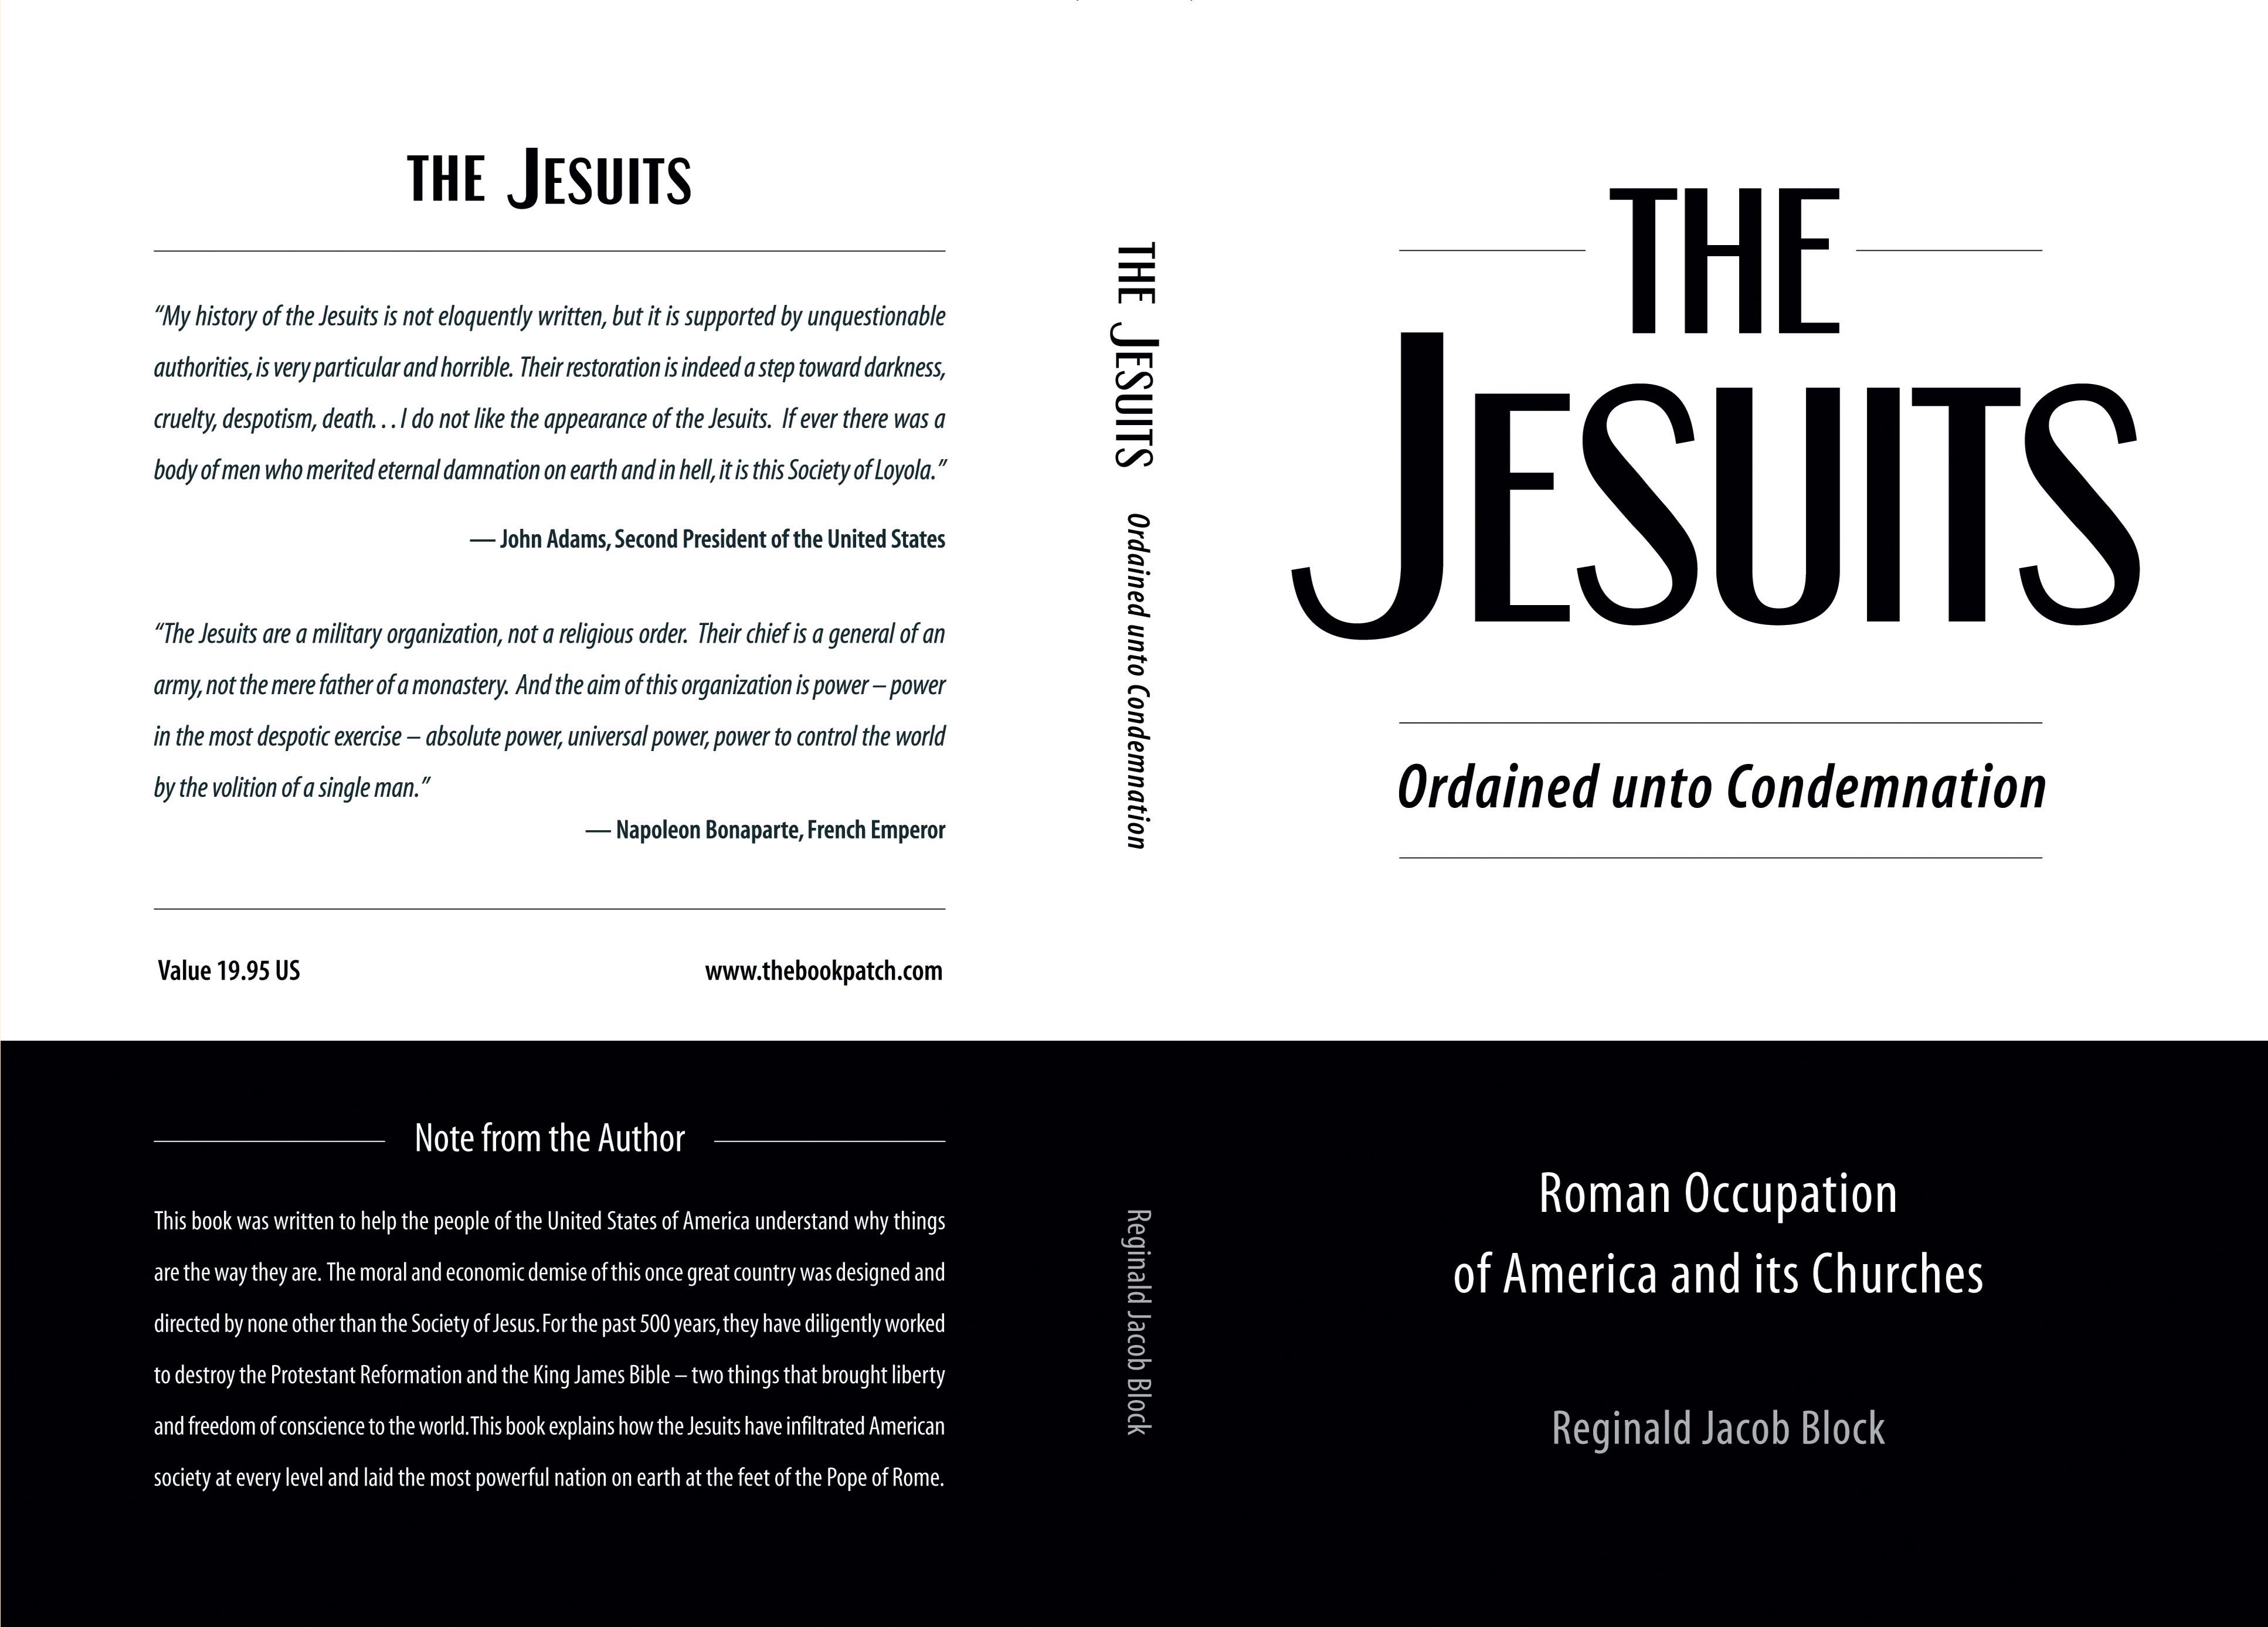 The Jesuits, Ordained Unto Condemnation cover image